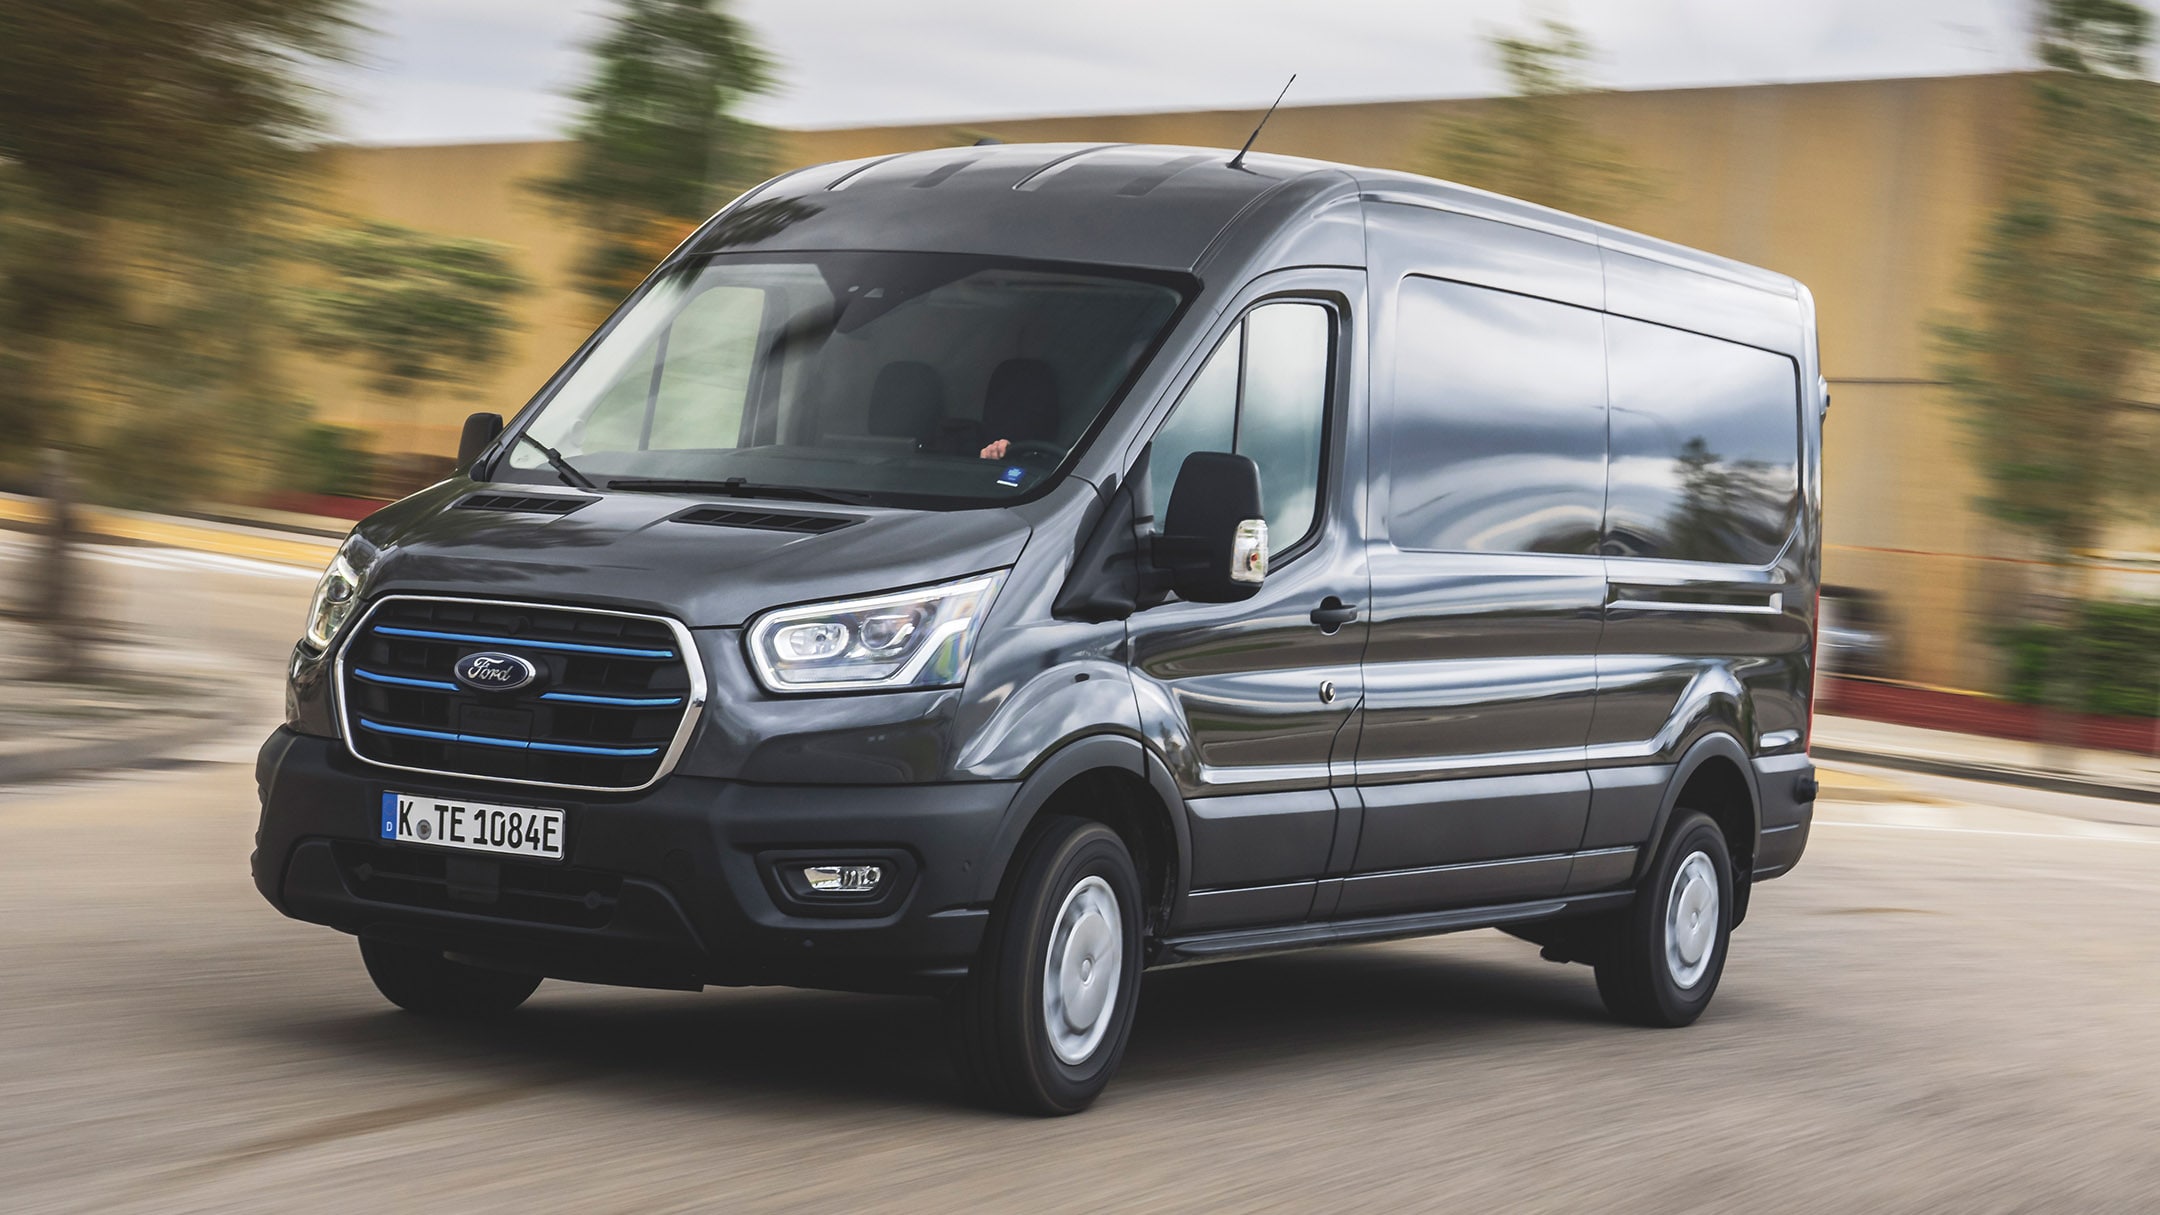 Ford E-Transit driving on motorway